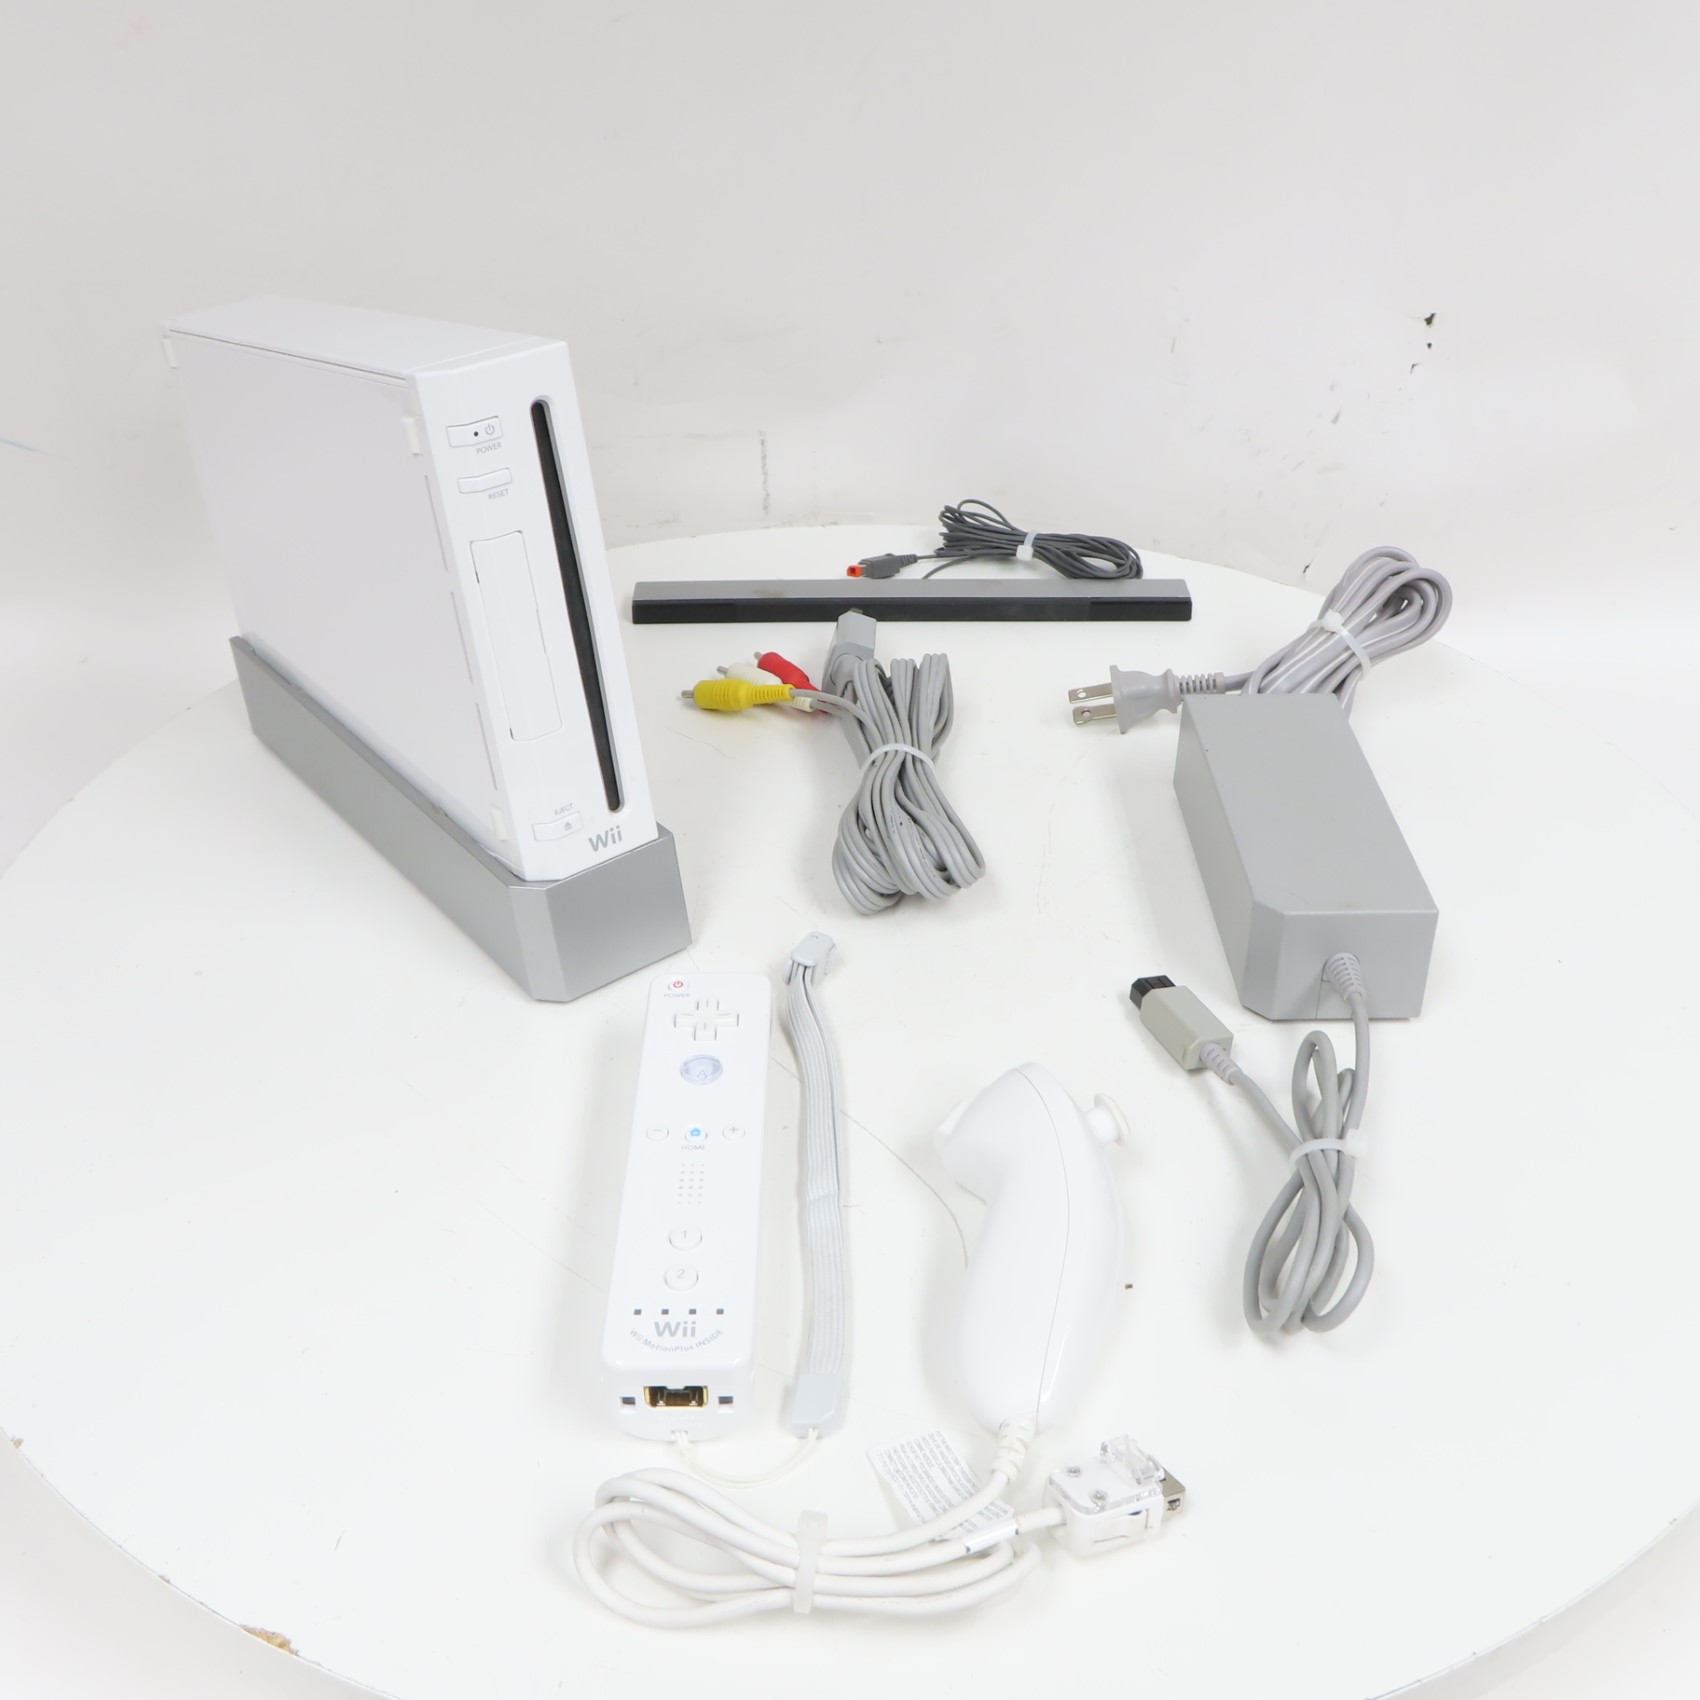 Nintendo Wii Console [RVL-001] Game System